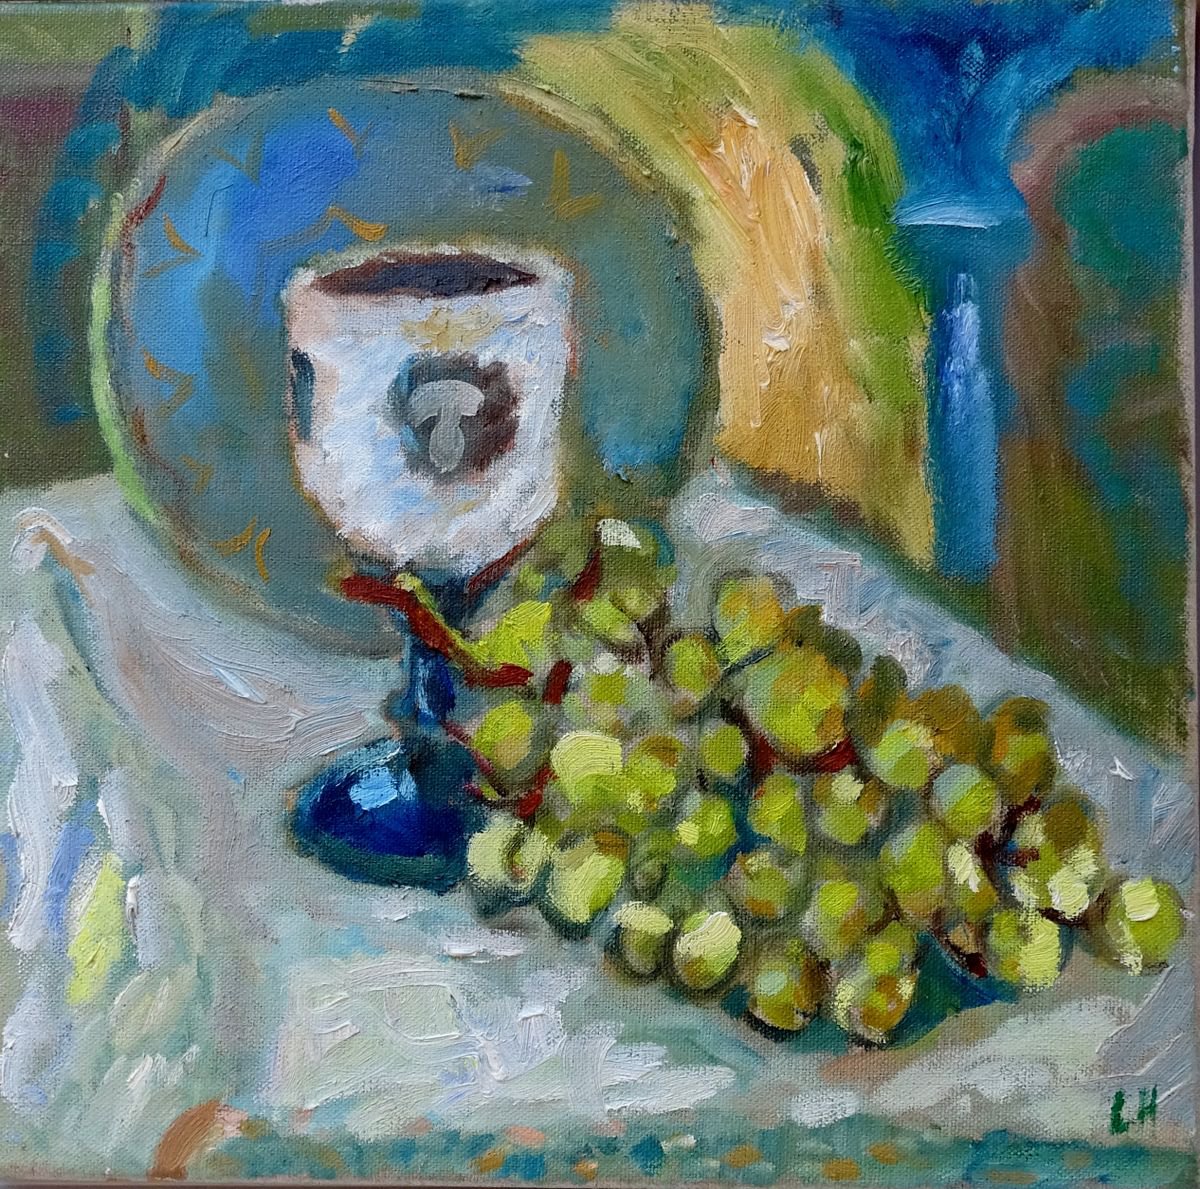 Goblet and Grapes by Lynda Hopkins